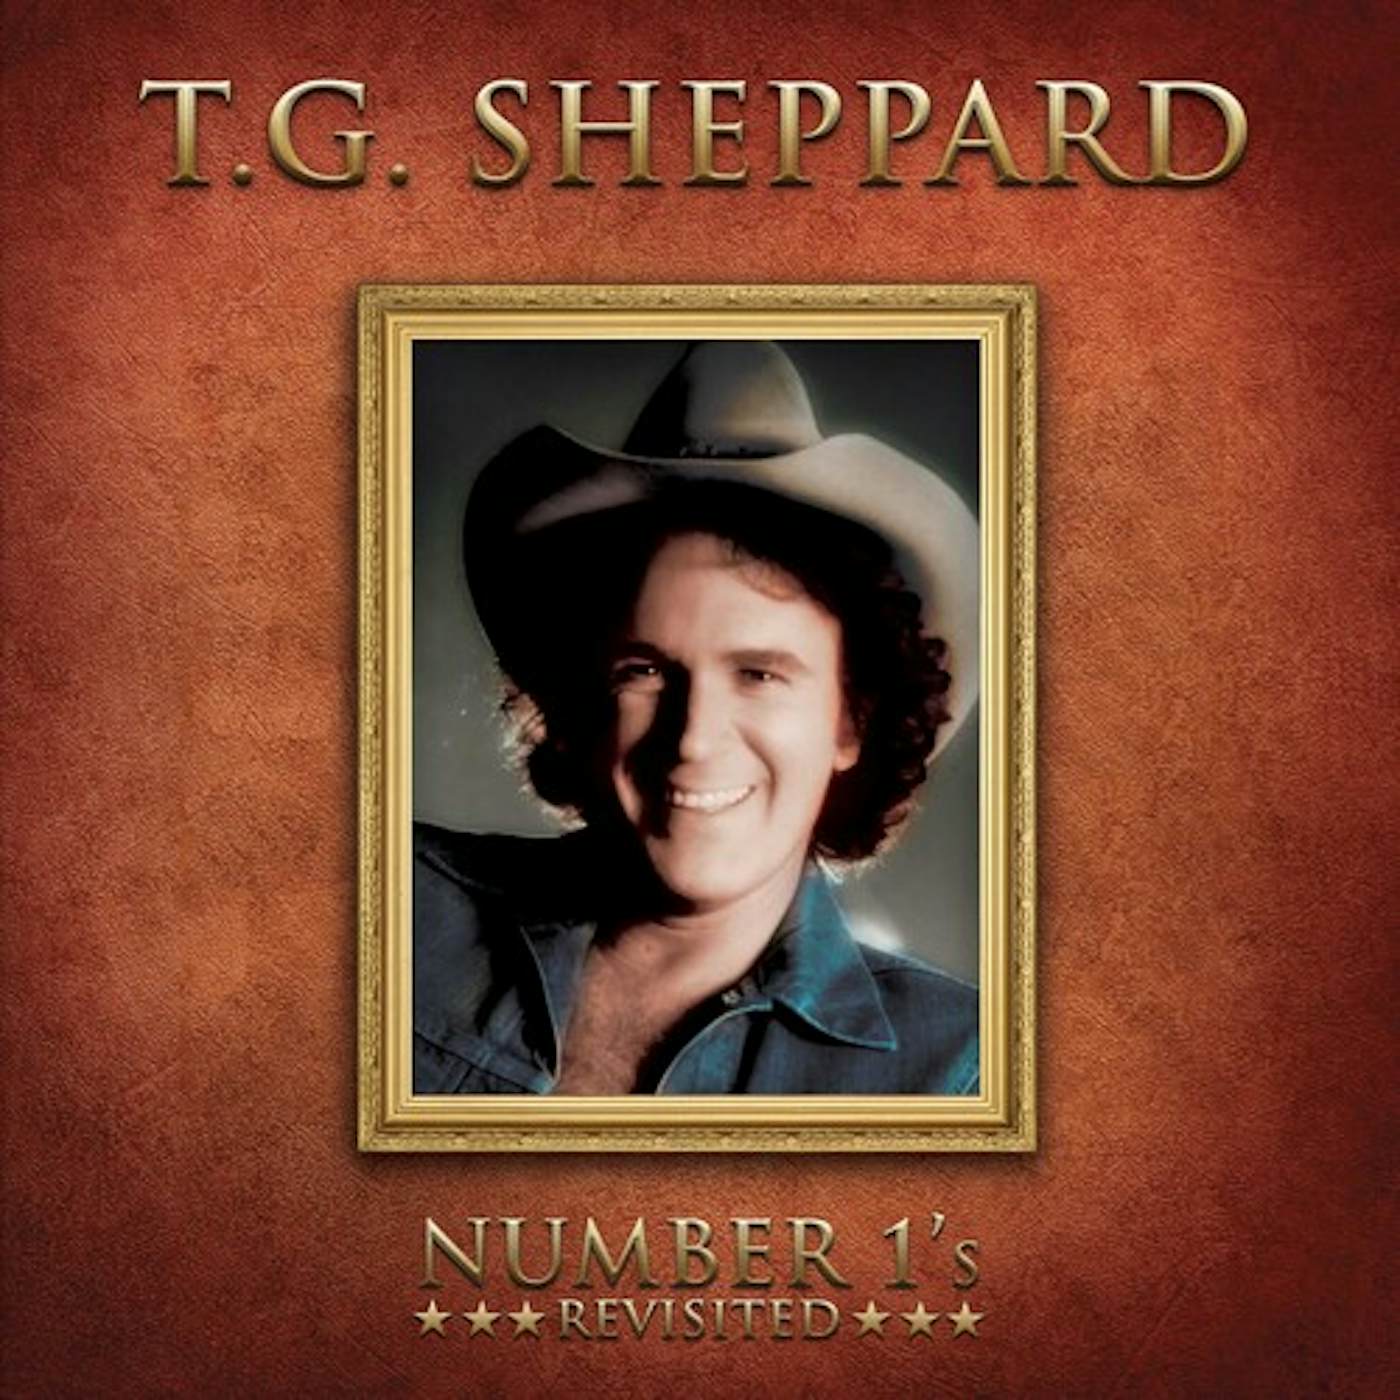 T.G. Sheppard NUMBER 1'S CD